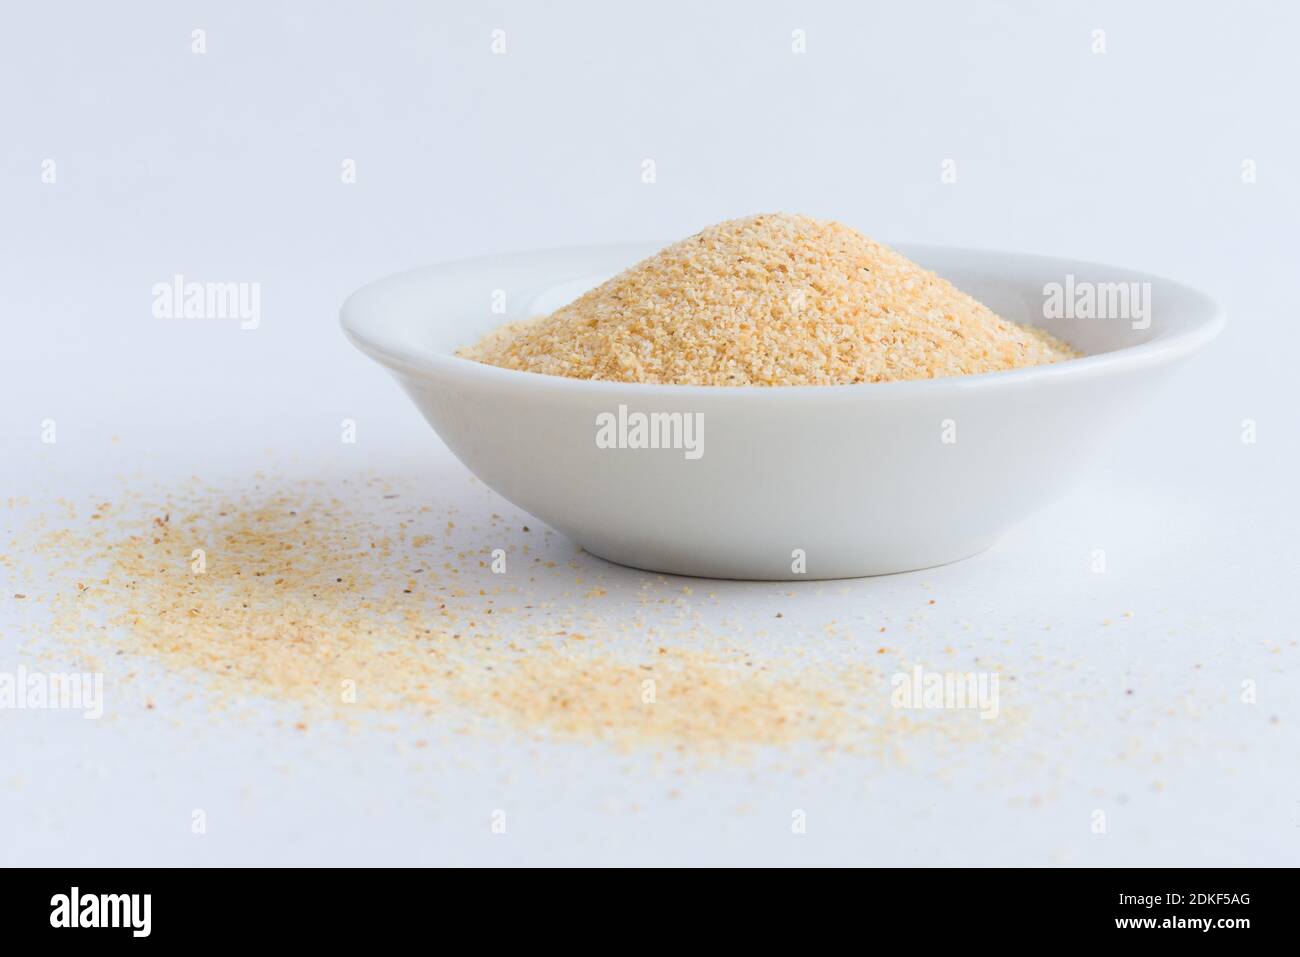 Brown Sugar In Bowl On White Background Stock Photo